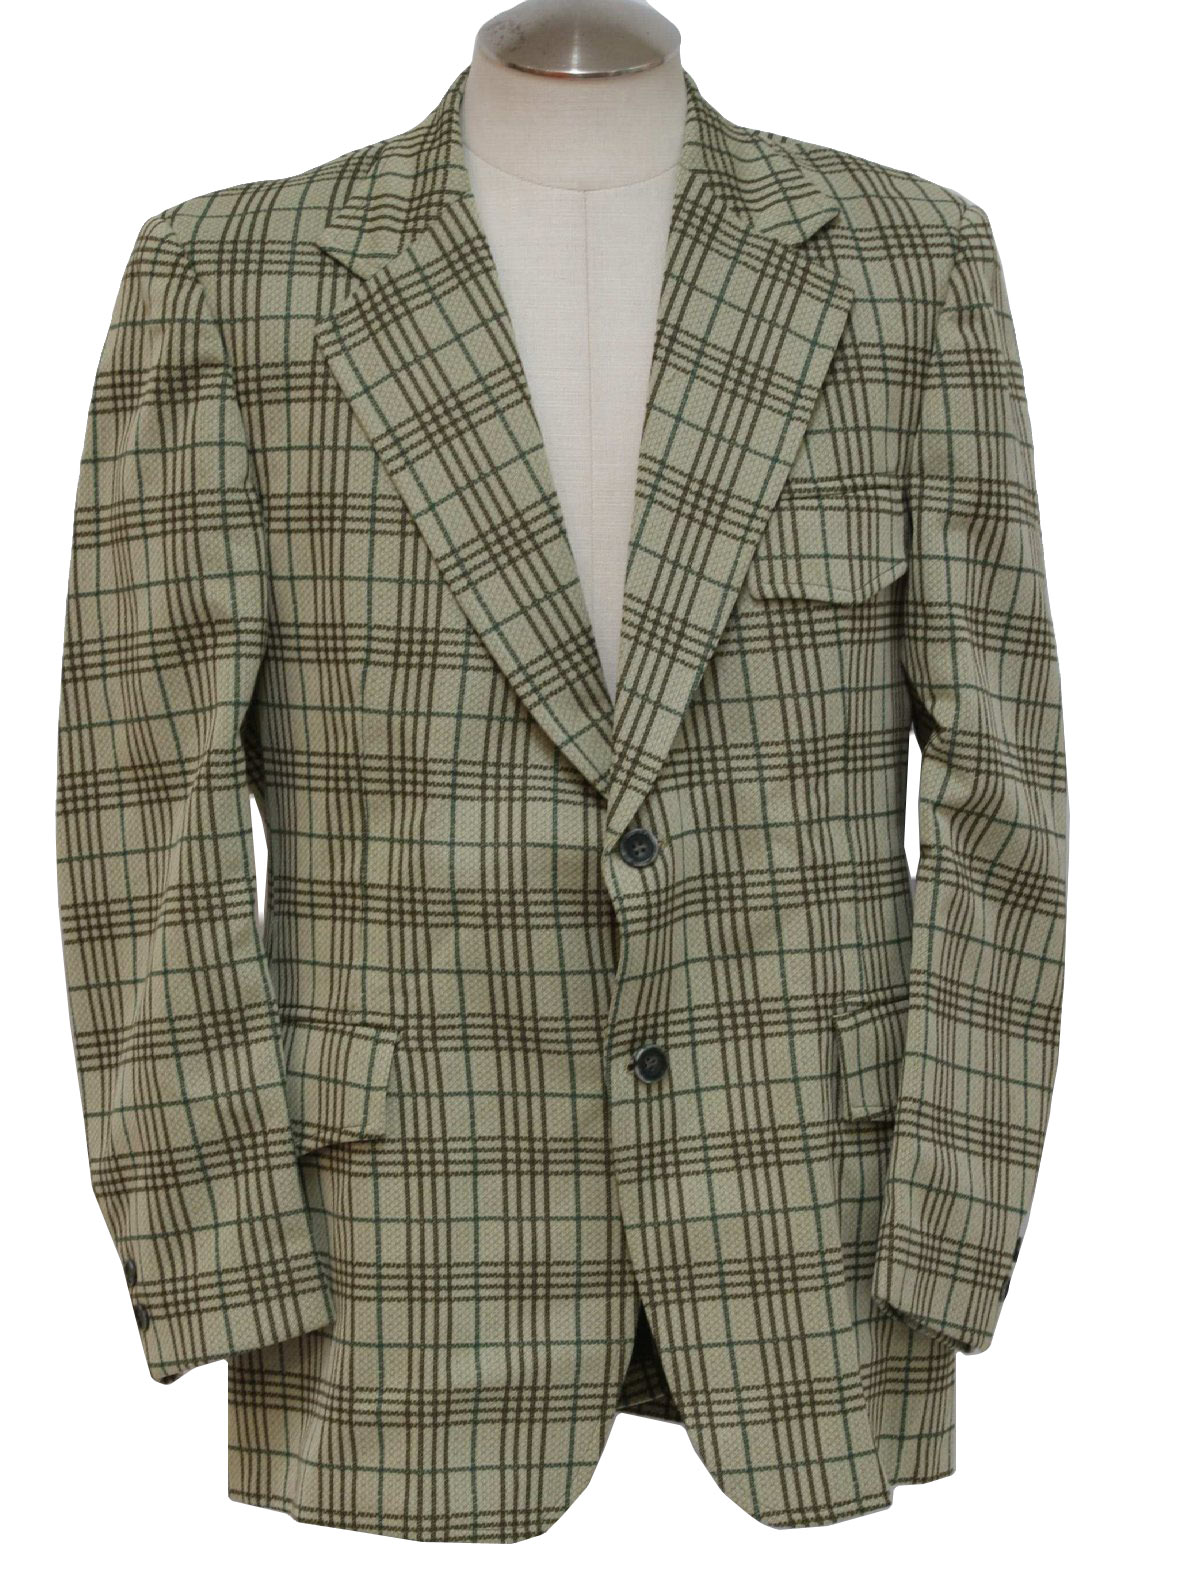 Retro 1970s Jacket: 70s -Panhandle Slim- Mens shades of green and ...